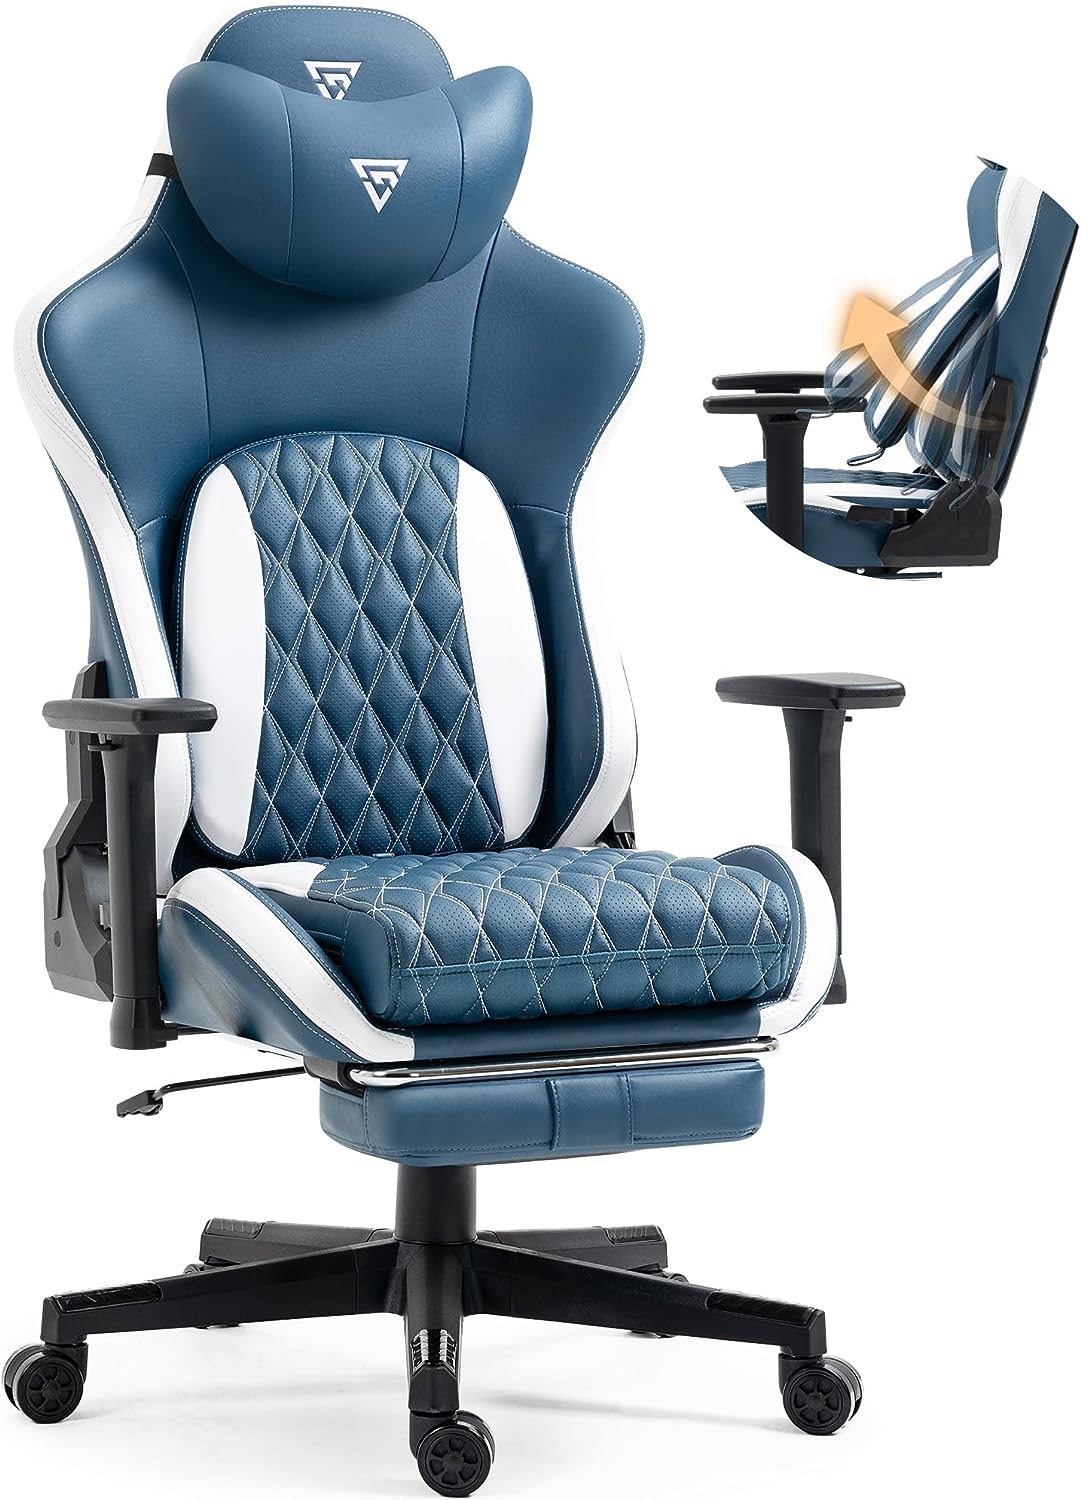 Blue Gaming Chair: Top 5 Best Blue Chairs For Gamers